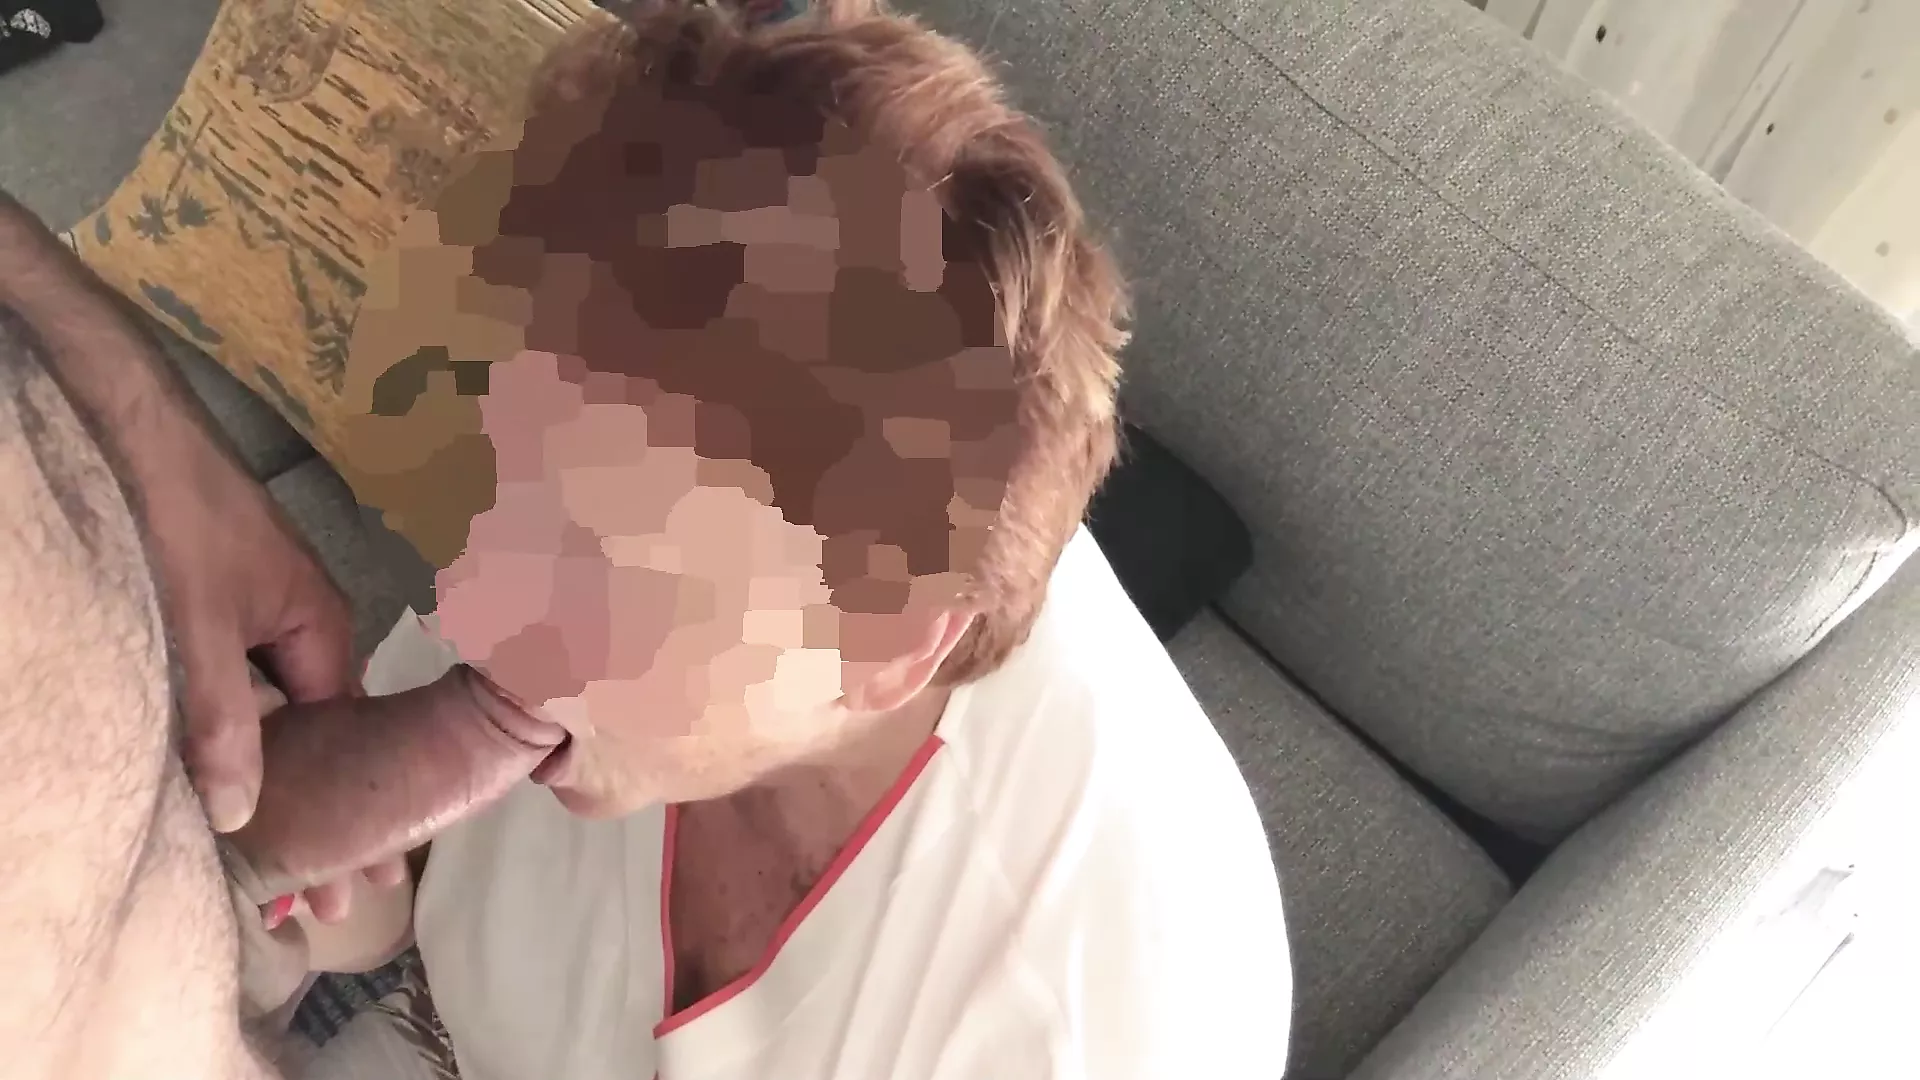 AMATEUR GRANNY PORN ANAL SEX AND CUM SWALLOWING WITH 80 YEARS OLD GRANDMA  picture